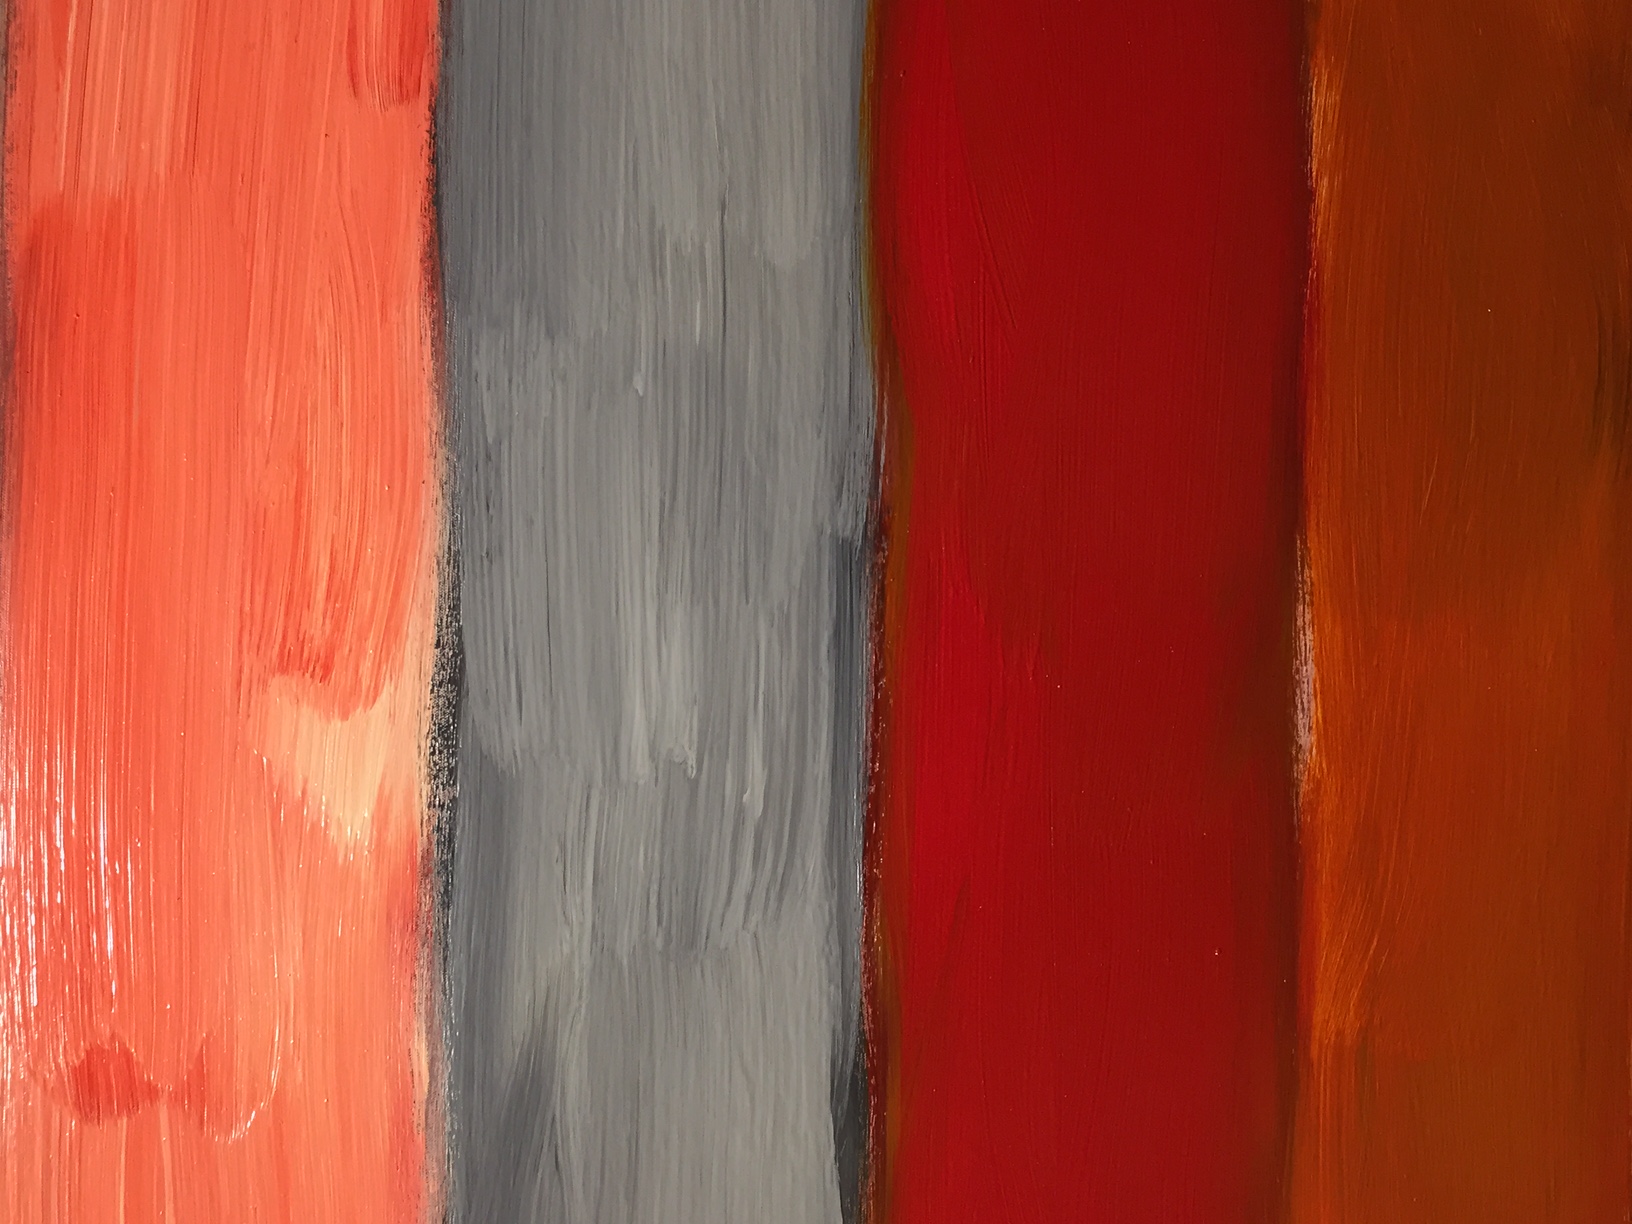 Sean Scully's Land Sea | The Roger Thomas Collection